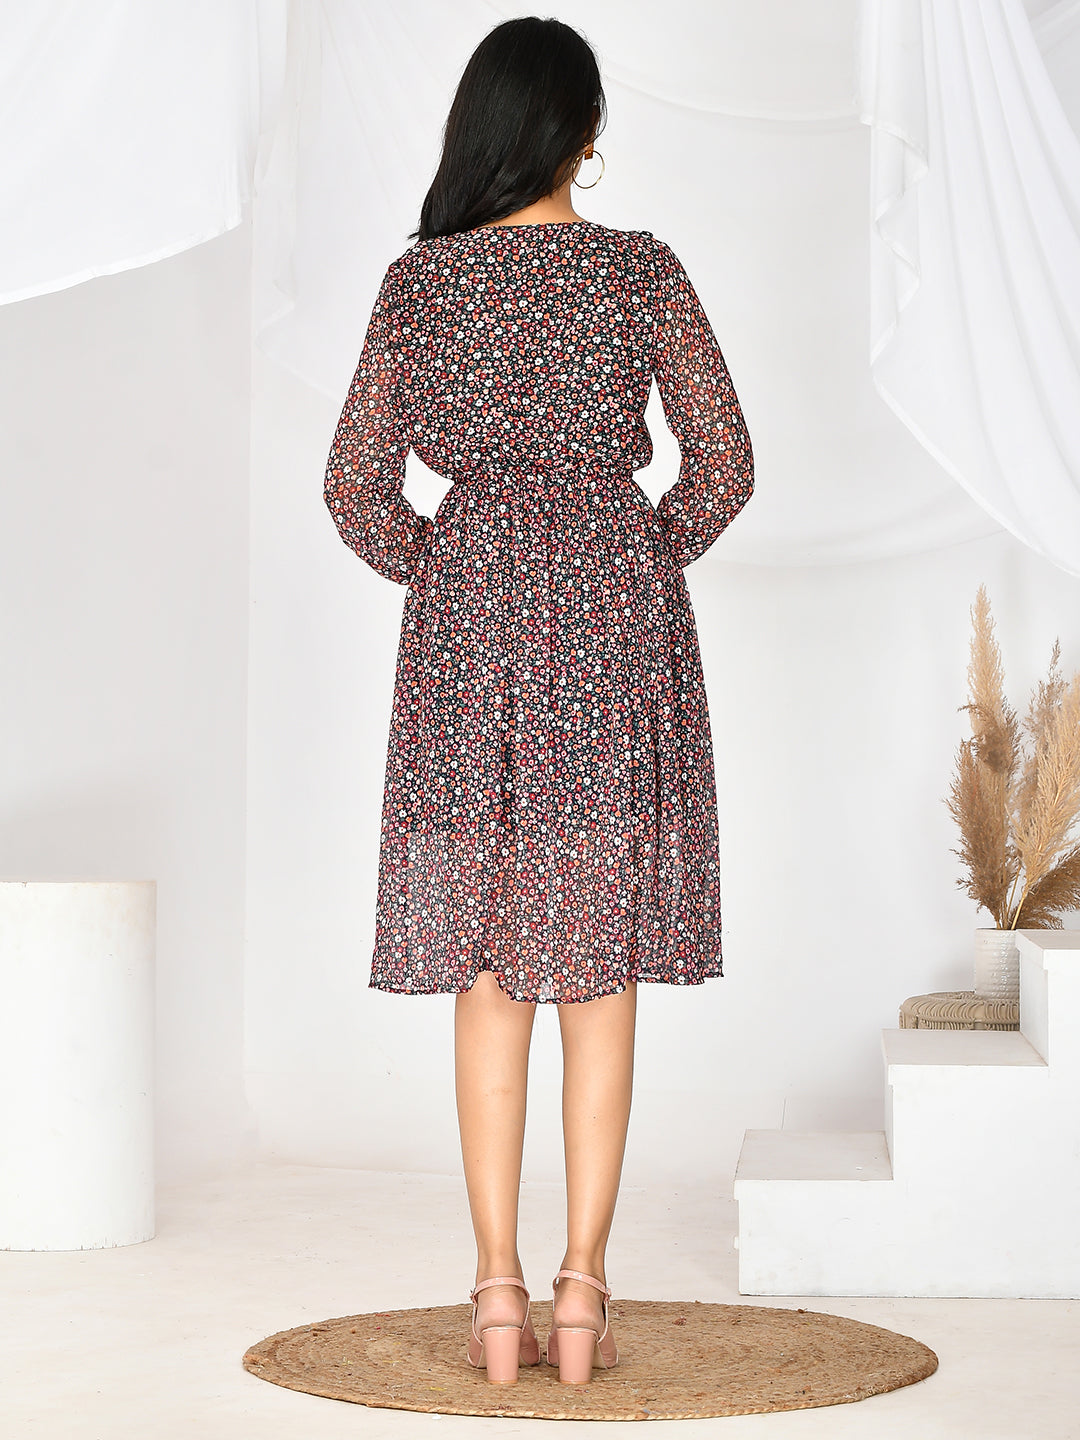 Flaunt your style with the Floral Printed V-Neck Knee Length Western Dress. The delicate floral print and v-neck design add a touch of femininity to this dress, making it the perfect choice for any occasion. Its knee-length cut ensures a flattering fit while keeping you comfortable all day long.